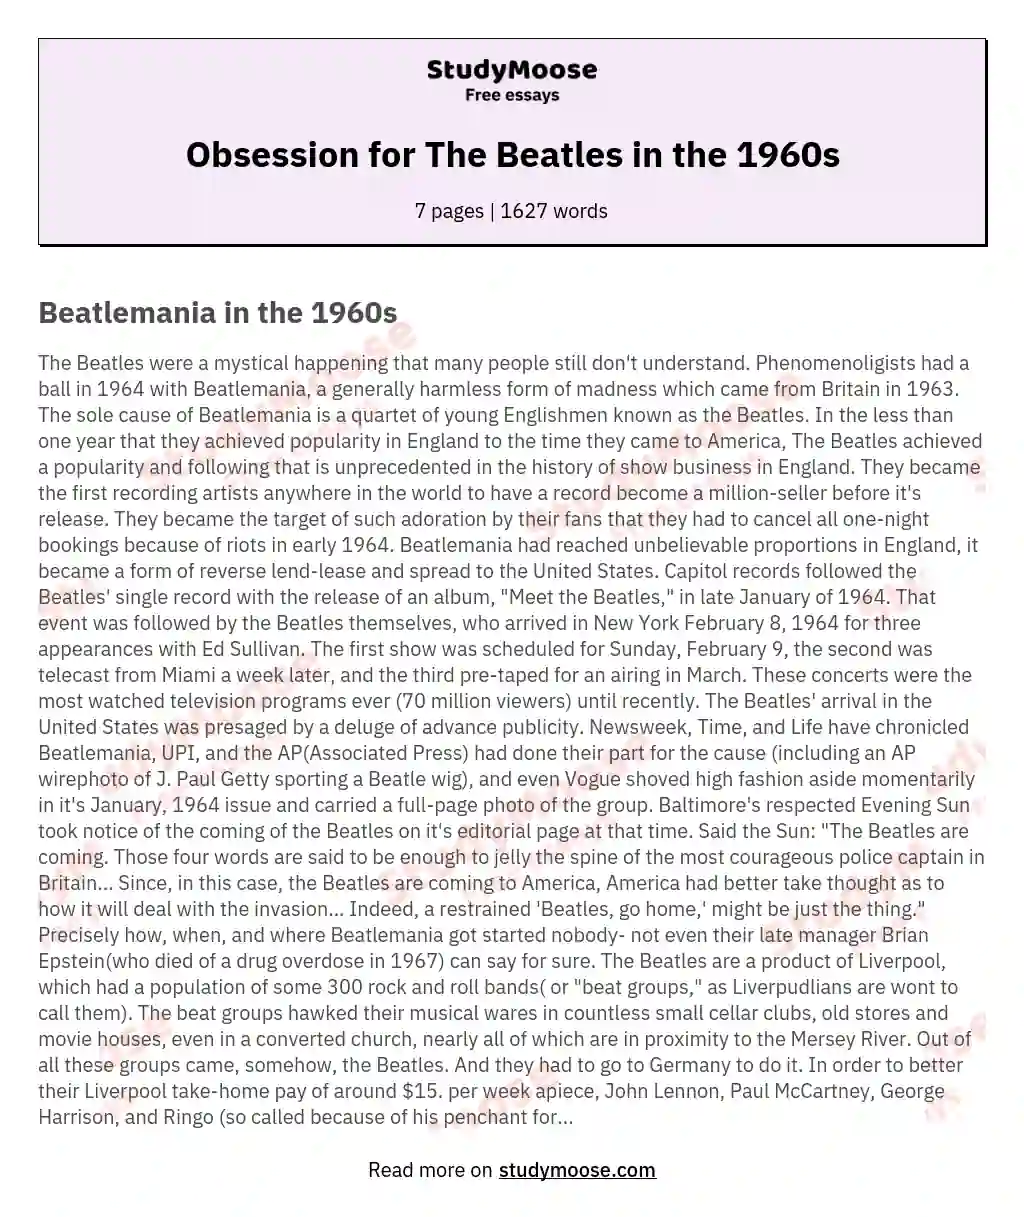 Obsession for The Beatles in the 1960s essay